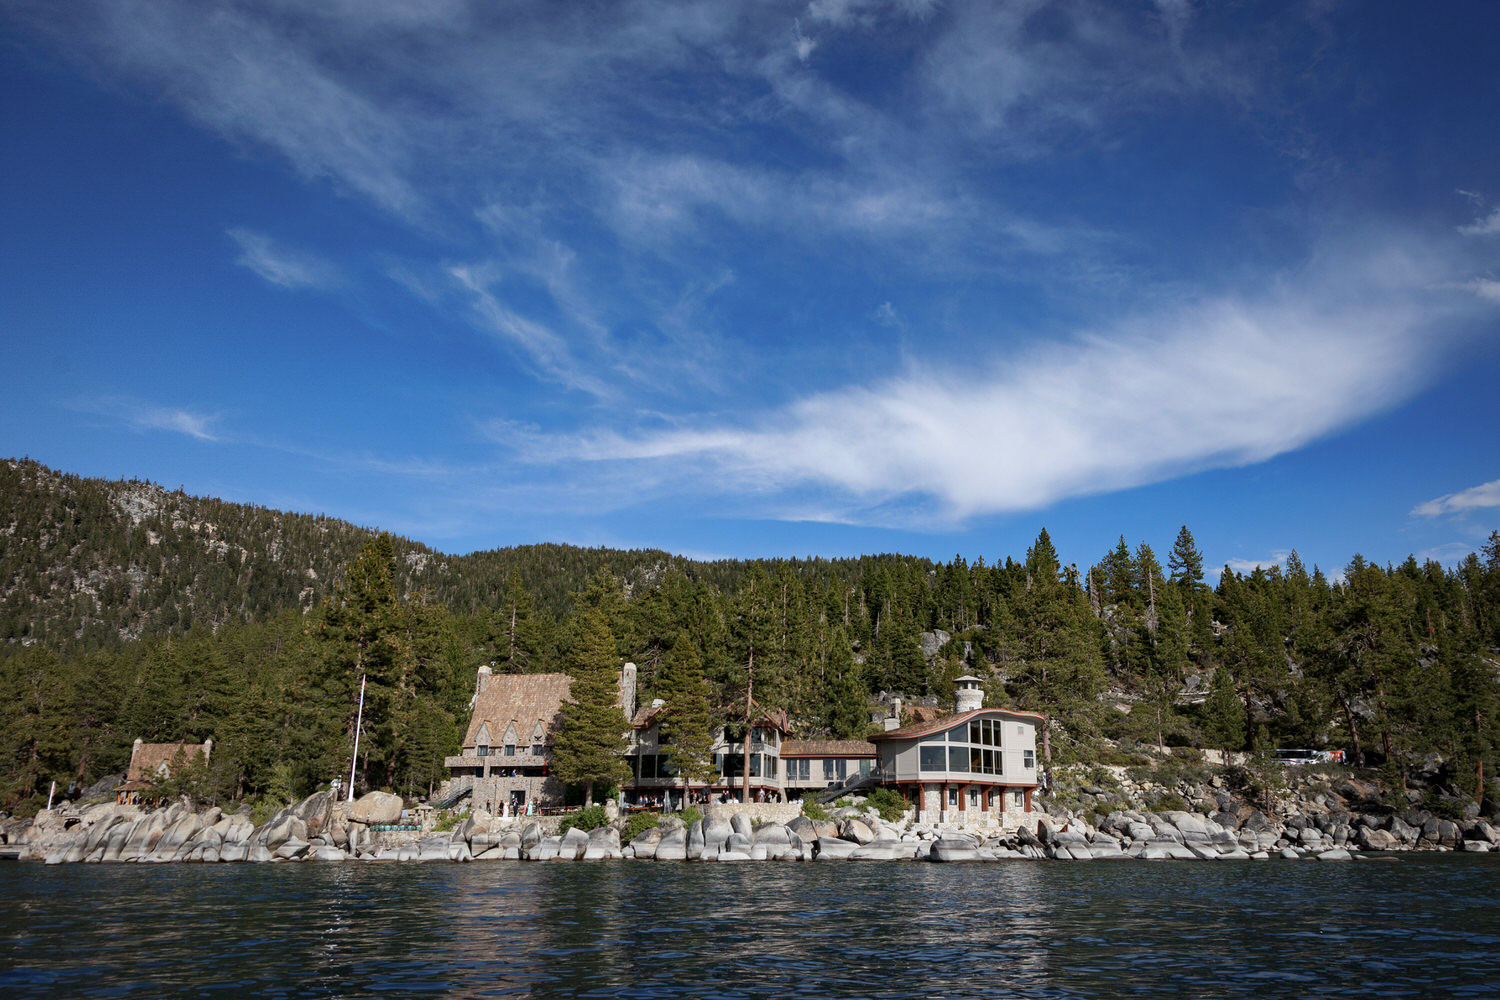 View from the water of the historic Thunderbird Lodge on Lake Tahoe's eastern shore.